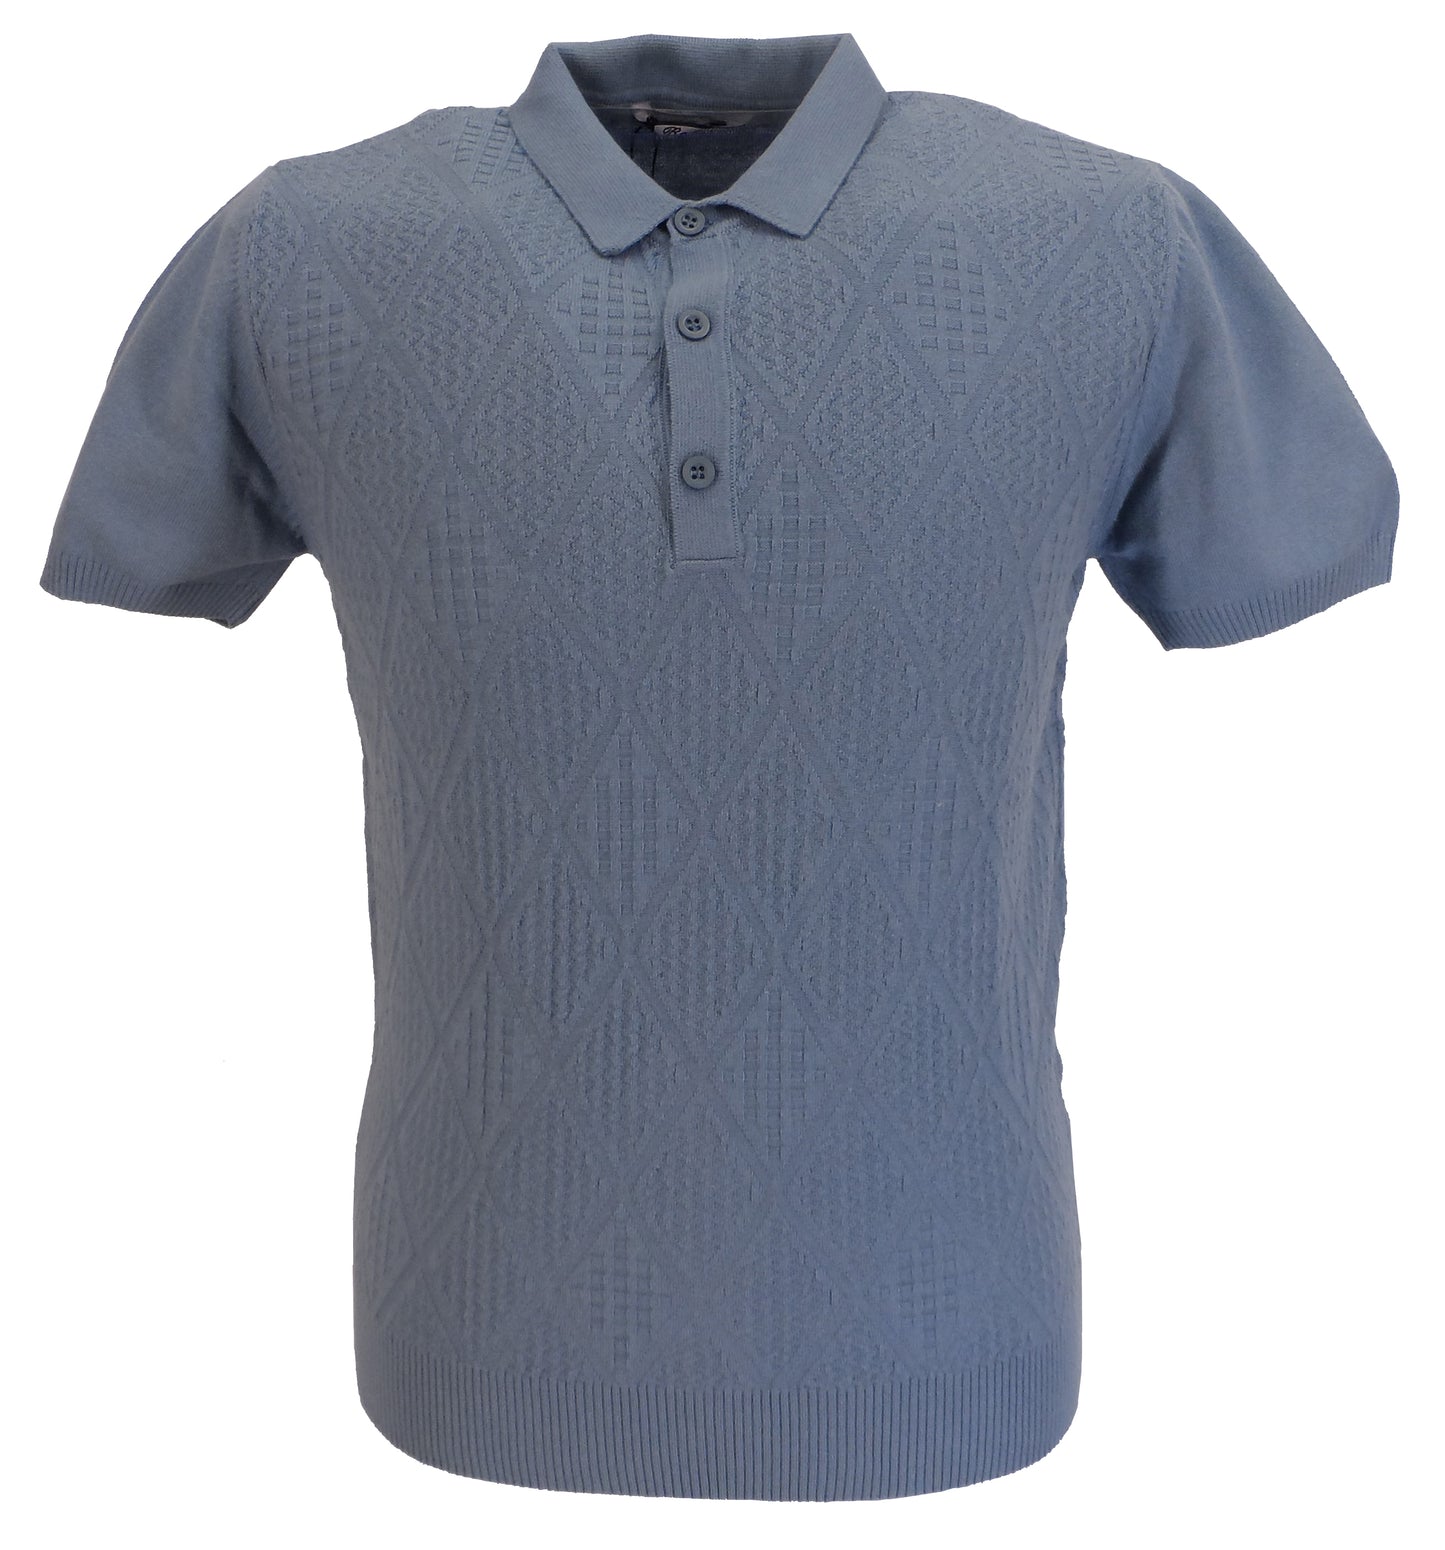 Relco Mens Blue Retro Patterned Knitted Polo Shirts